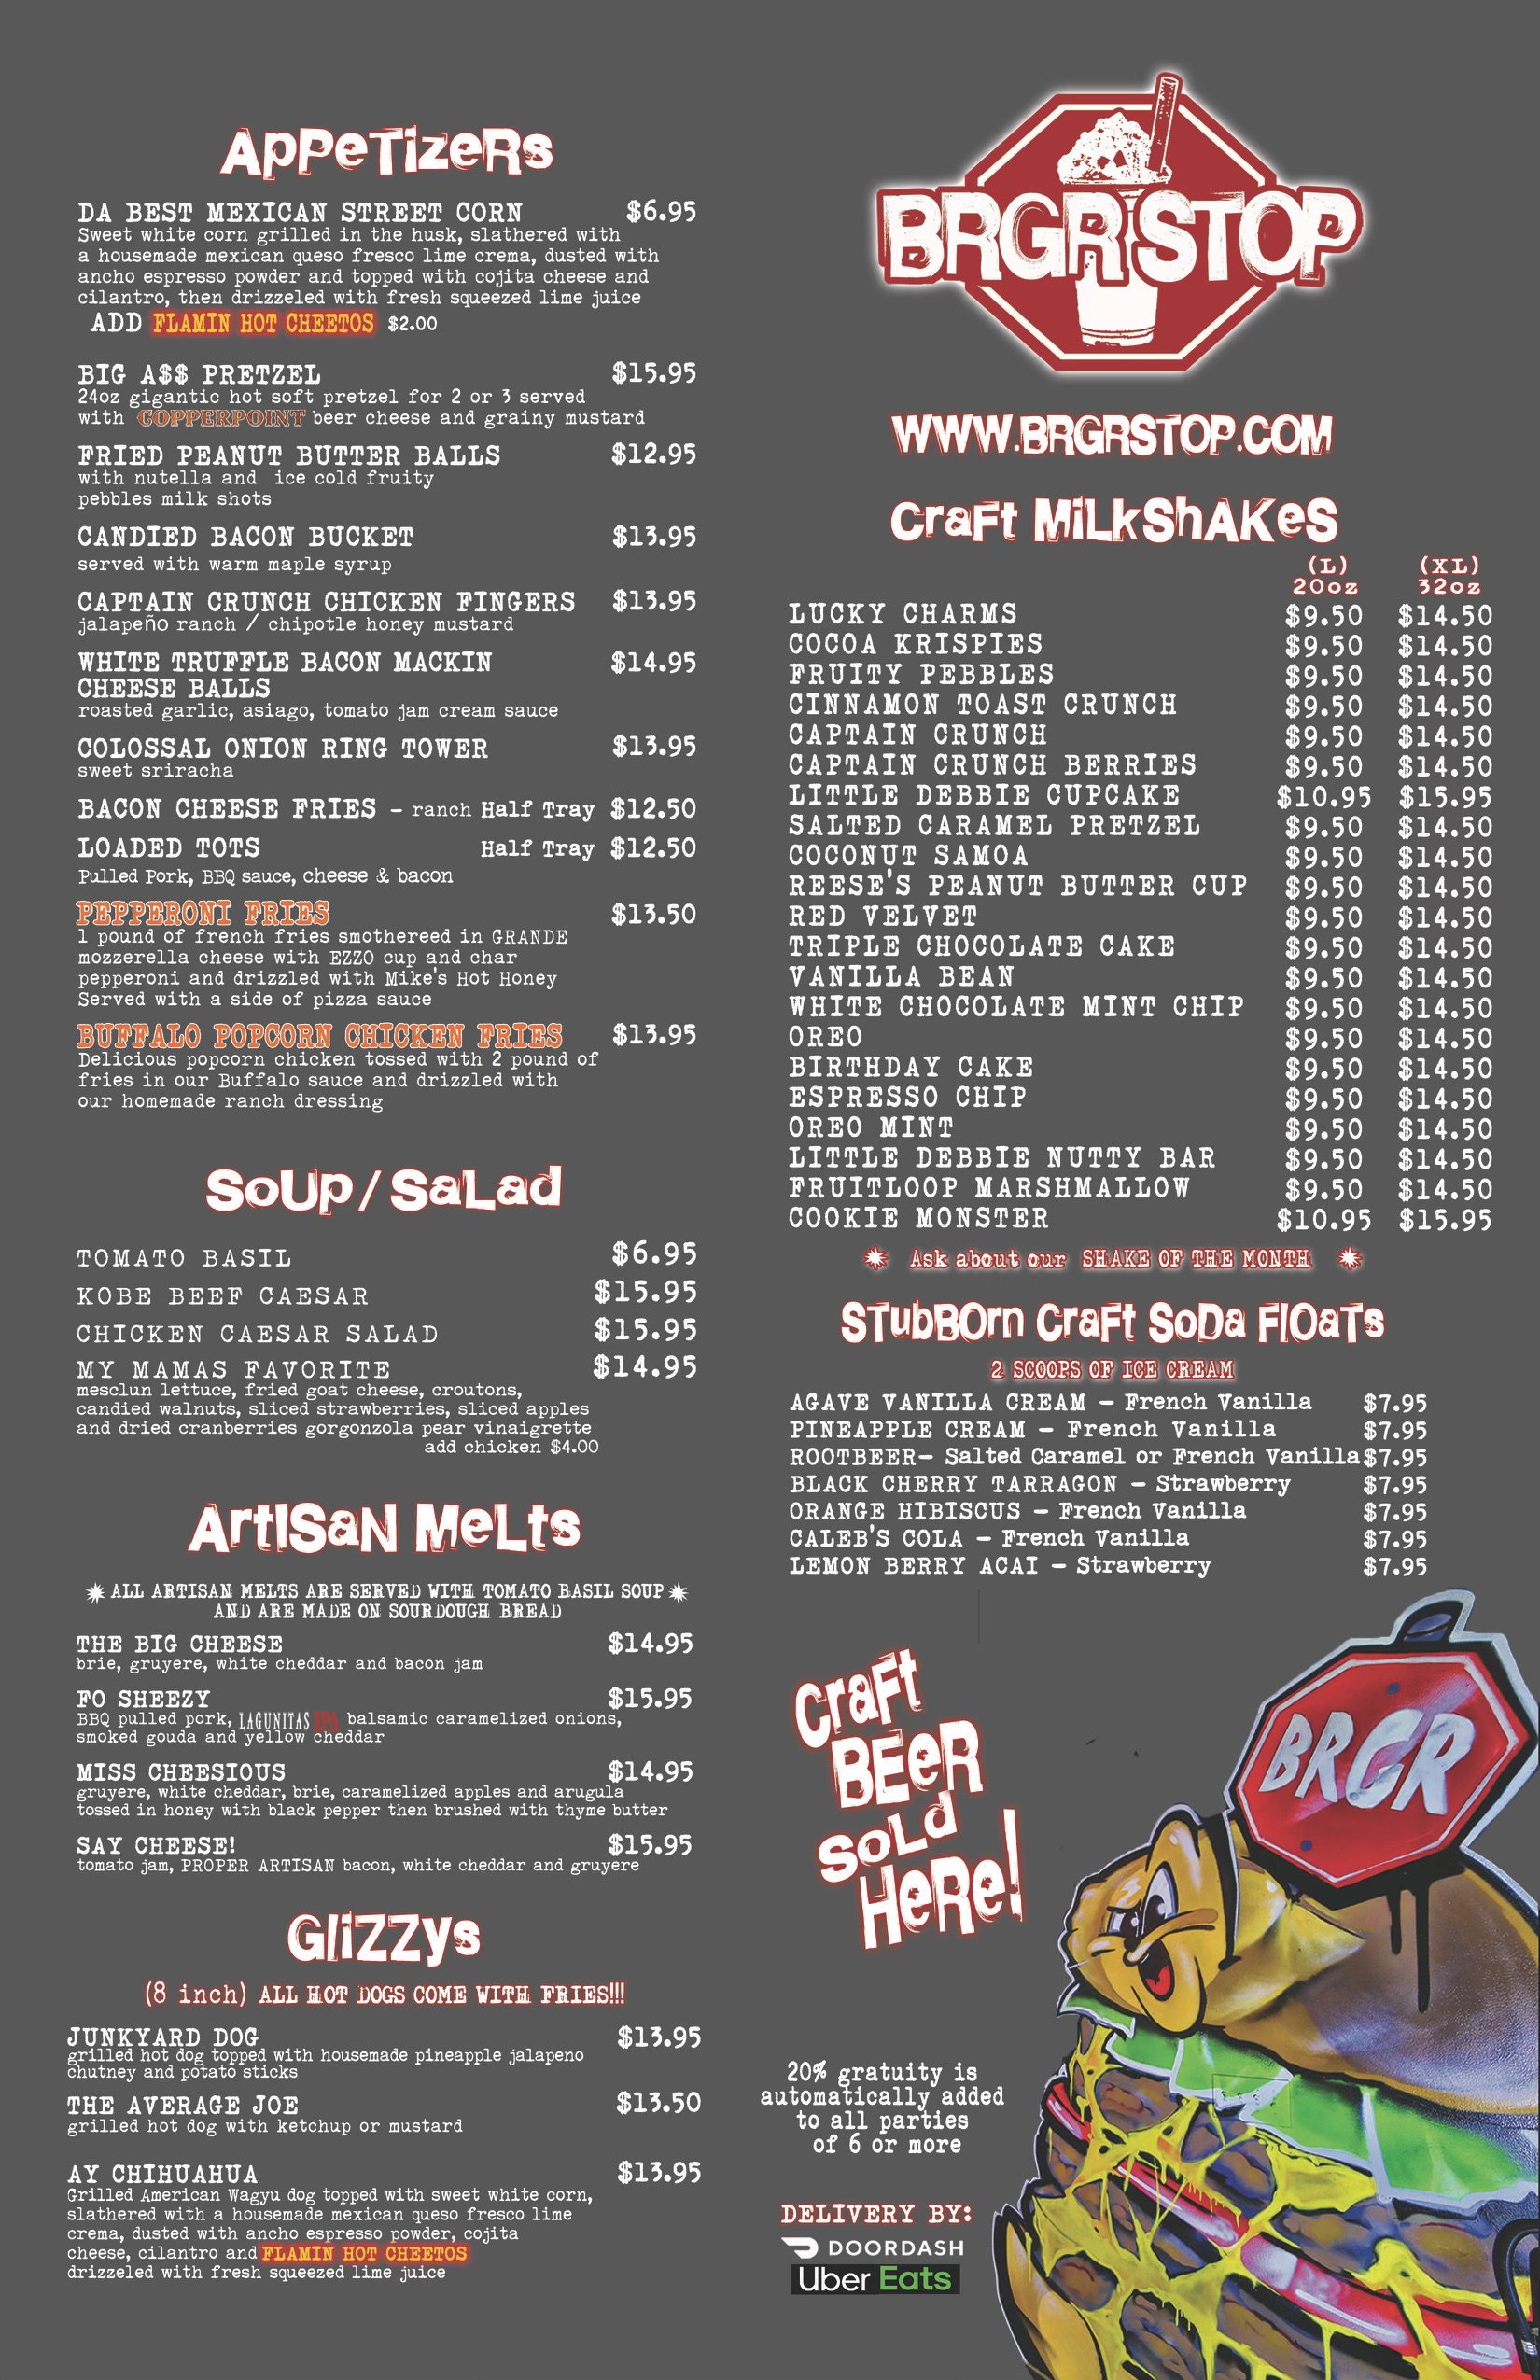 Menu from BRGRSTOP featuring appetizers, soups and salads, artisan melts, craft milkshakes, and craft soda floats, with a vibrant and colorful graphic design.